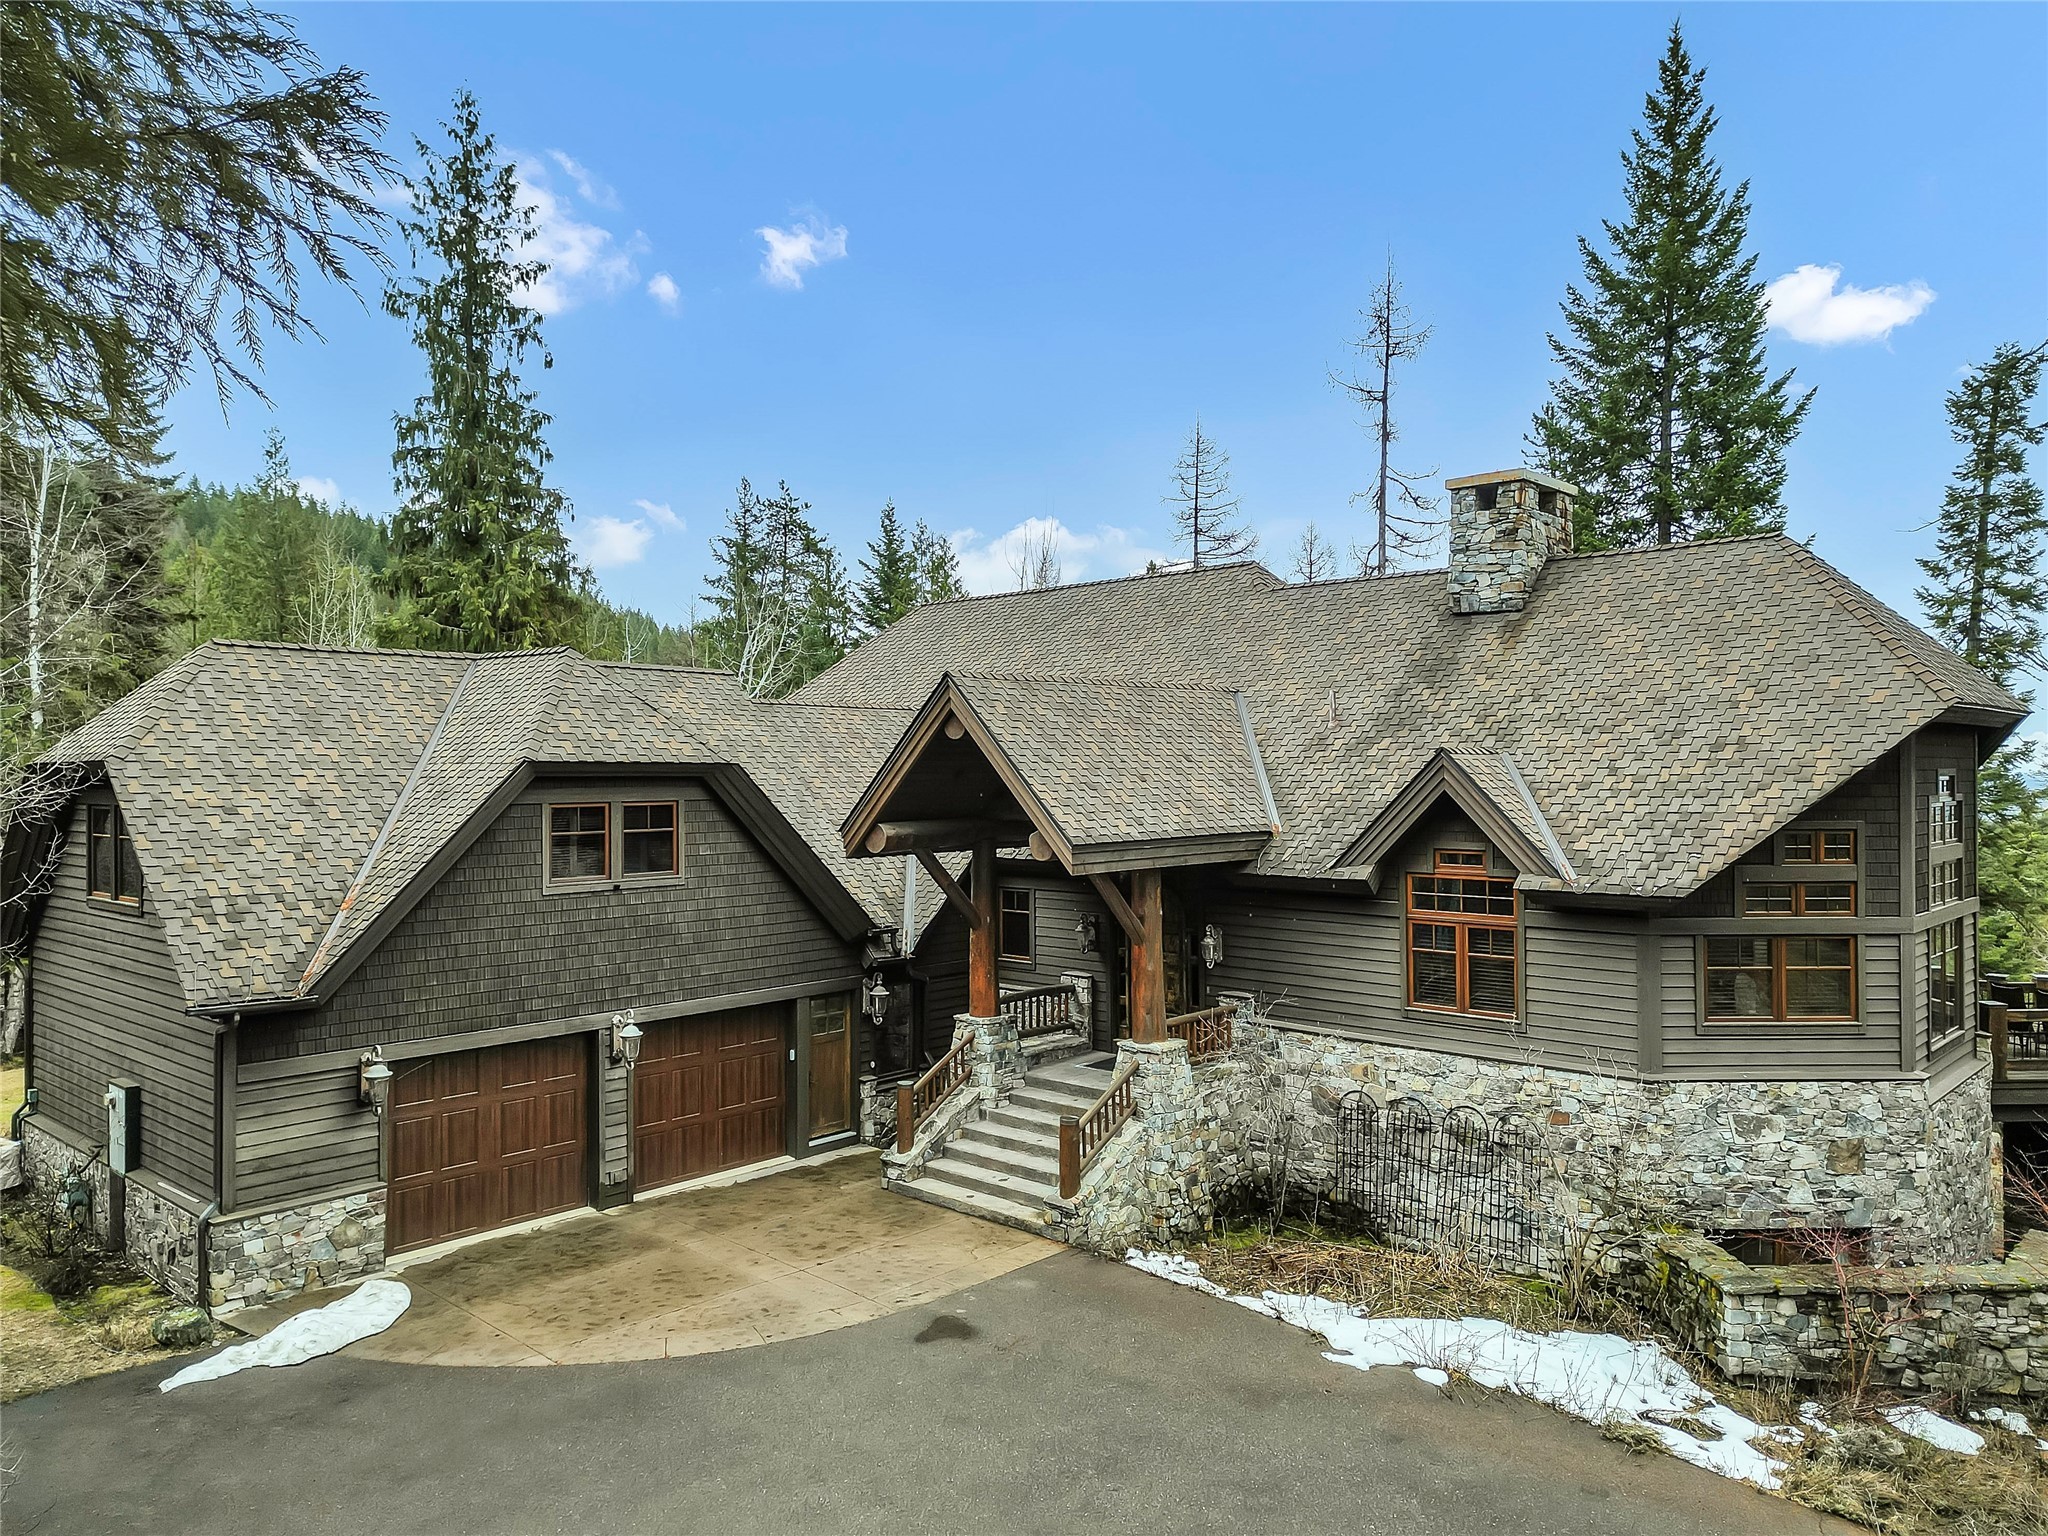 “Prestige & Comfort” in the distinguished Iron Horse community of Whitefish. Ideal as a primary residence or vacation retreat, this home is designed for gatherings with family & friends. Embodying Montana’s essence, this home features timber & stone construction, handmade railings & custom doorways. The heart of the residence is the open floor plan kitchen, dining, & great room beneath high ceilings & large windows that enhance the ambiance & lend a cabin-like feel to this luxury estate. The primary en-suite with cozy in-wall fireplace seamlessly adjoins the great room while the upper & lower levels offer versatility with a large en-suite, bunk room, pool table, & additional bedroom for guest comfort. The deck includes a wood-burning fireplace, built-in BBQ, & breathtaking views for outdoor entertainment. Convenient to downtown Whitefish, Whitefish Mountain Ski Resort, Glacier Park, & Glacier International Airport. Contact Kelly Rigg at 406-382-9518 or your real estate professional. Building plans are available. This home does not include an Iron Horse Golf or Social membership.